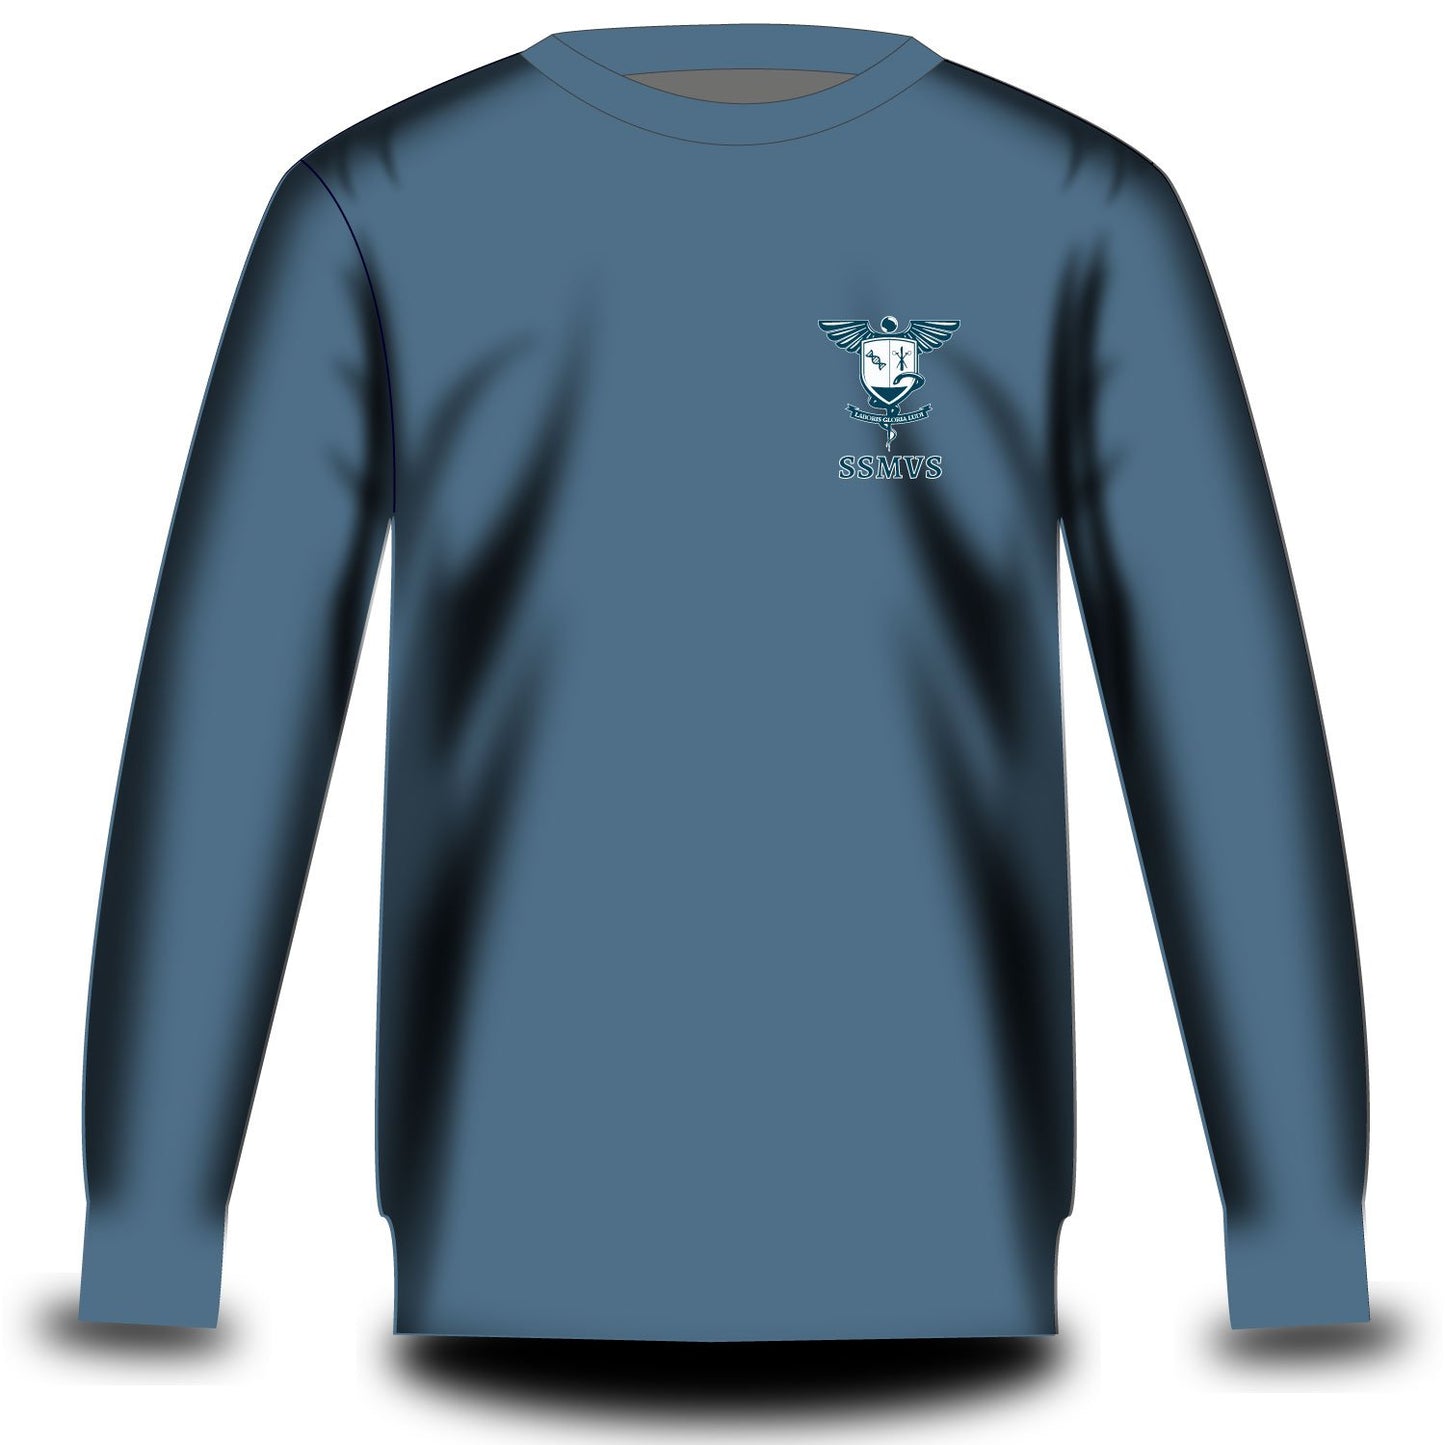 sidney sussex medical and veterinary society sweatshirt airforce blue